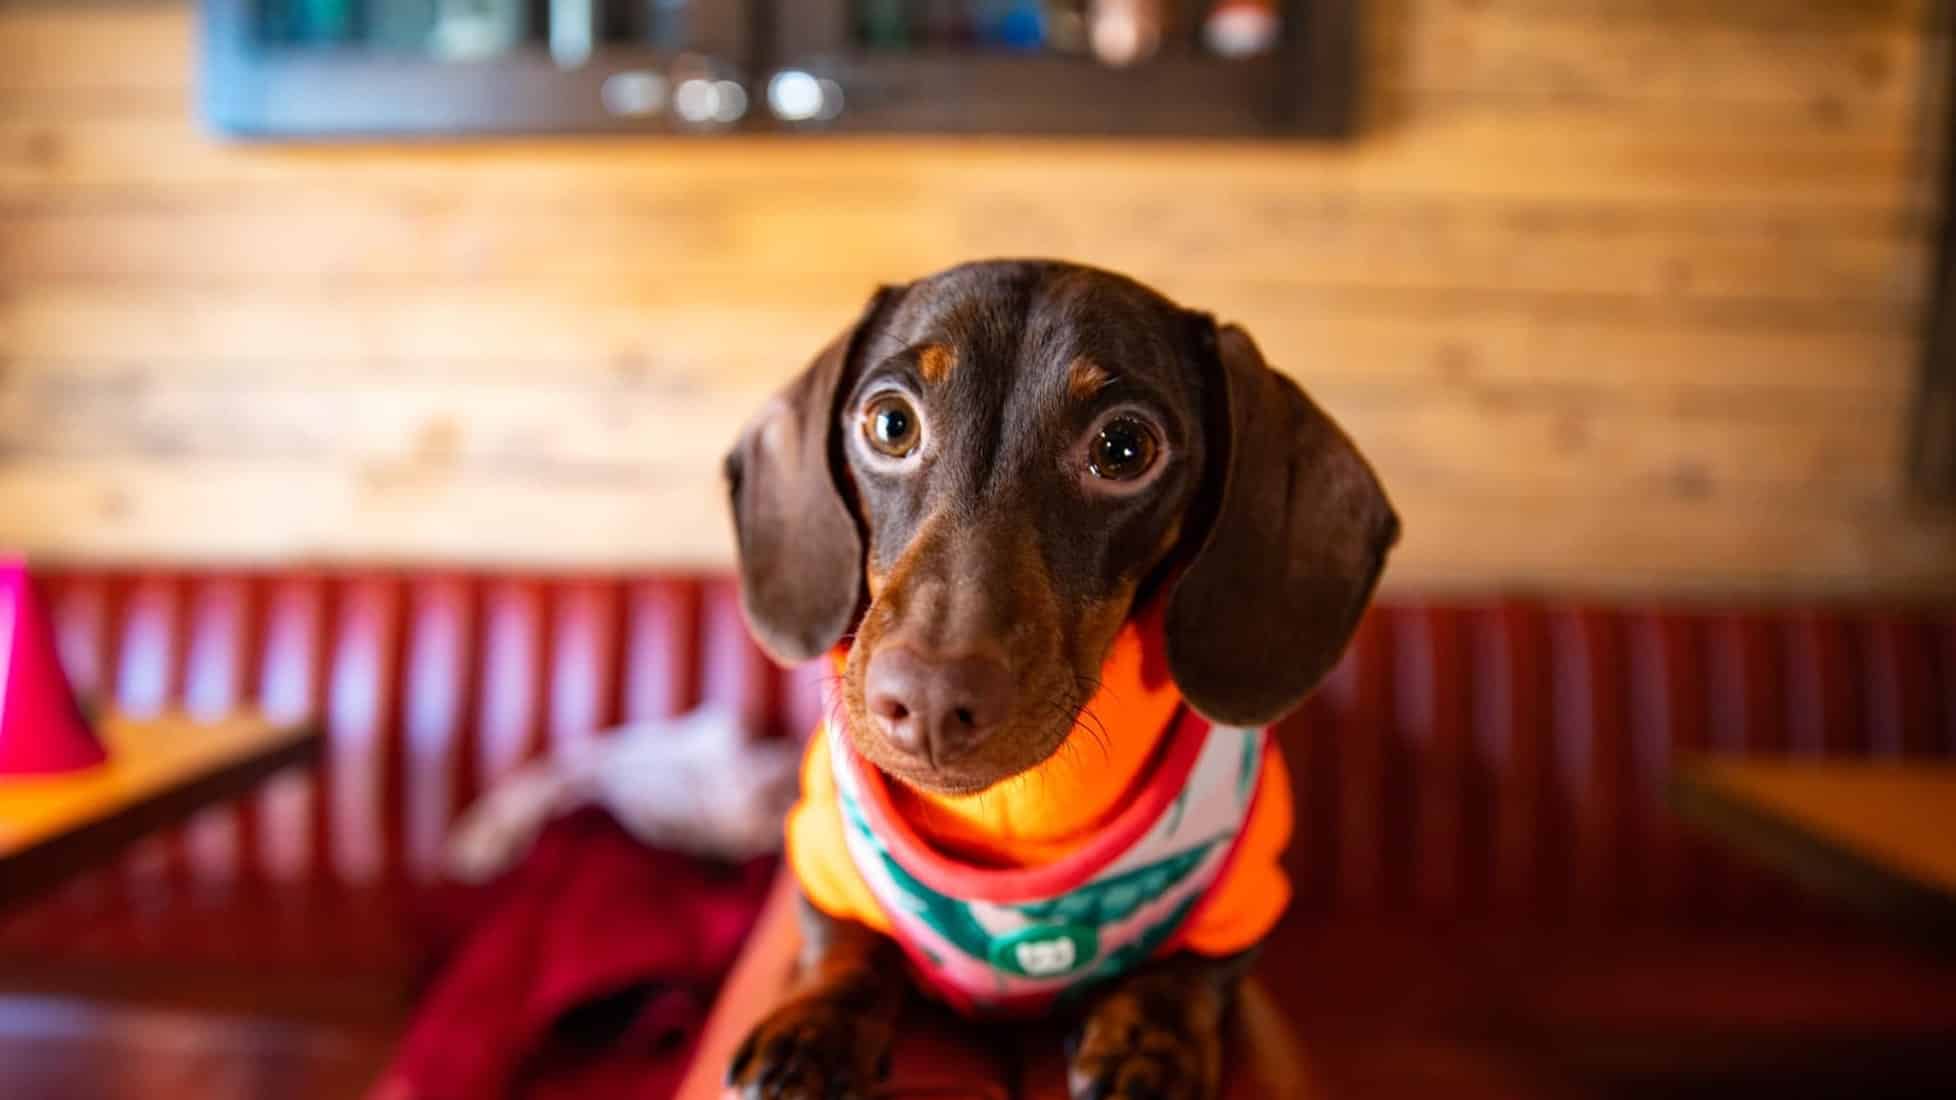 A dog attending the Pup-Up Cafe